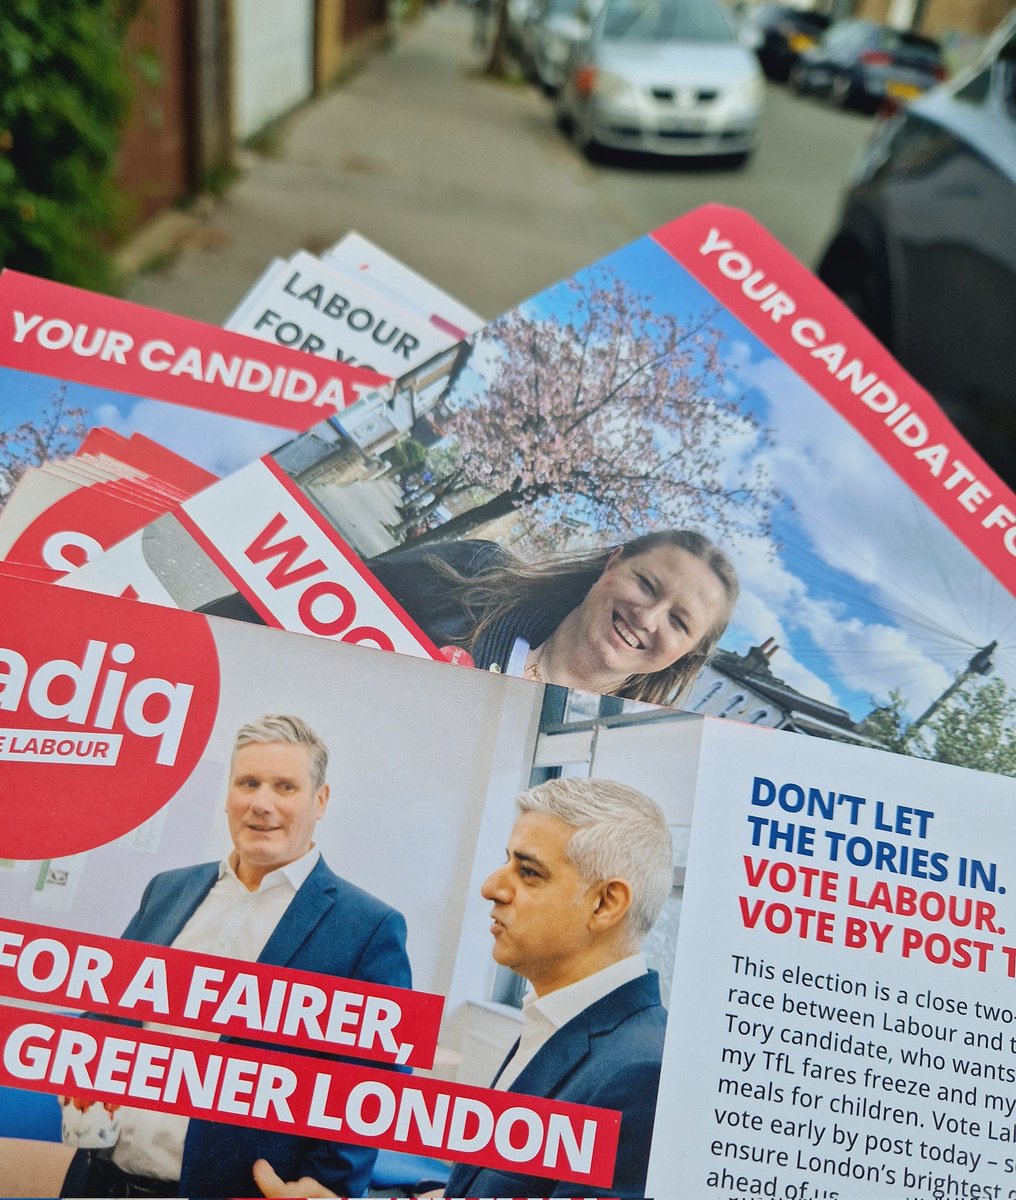 Postal votes are landing in Woodside! A power round asking residents to give all 4 of their votes to our Labour team: 🔴 @JessHammersleyR 🔴 @SadiqKhan 🔴 @MinsuR 🔴 @LondonLabour list Looking forward to speaking to people again tomorrow ✌️